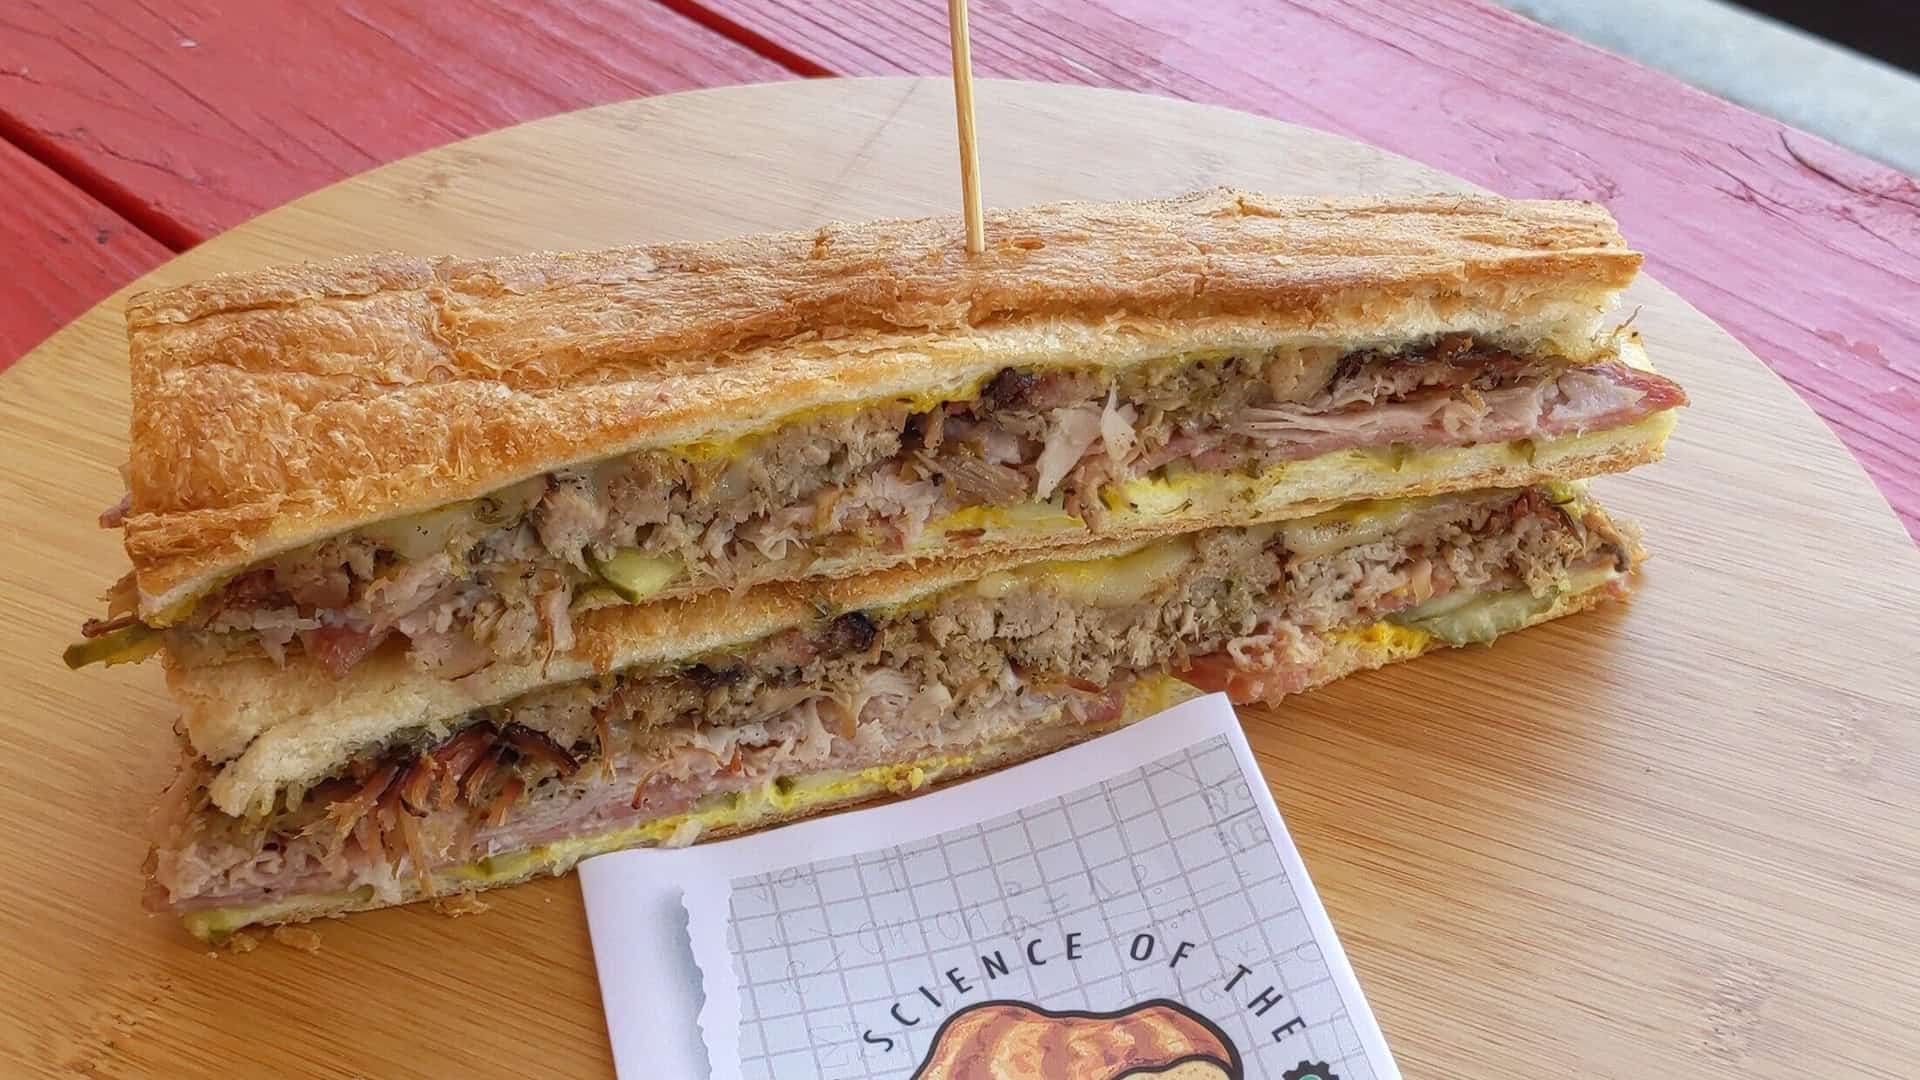 The beloved Cuban Sandwich event is back this fall in celebration of Popular Science